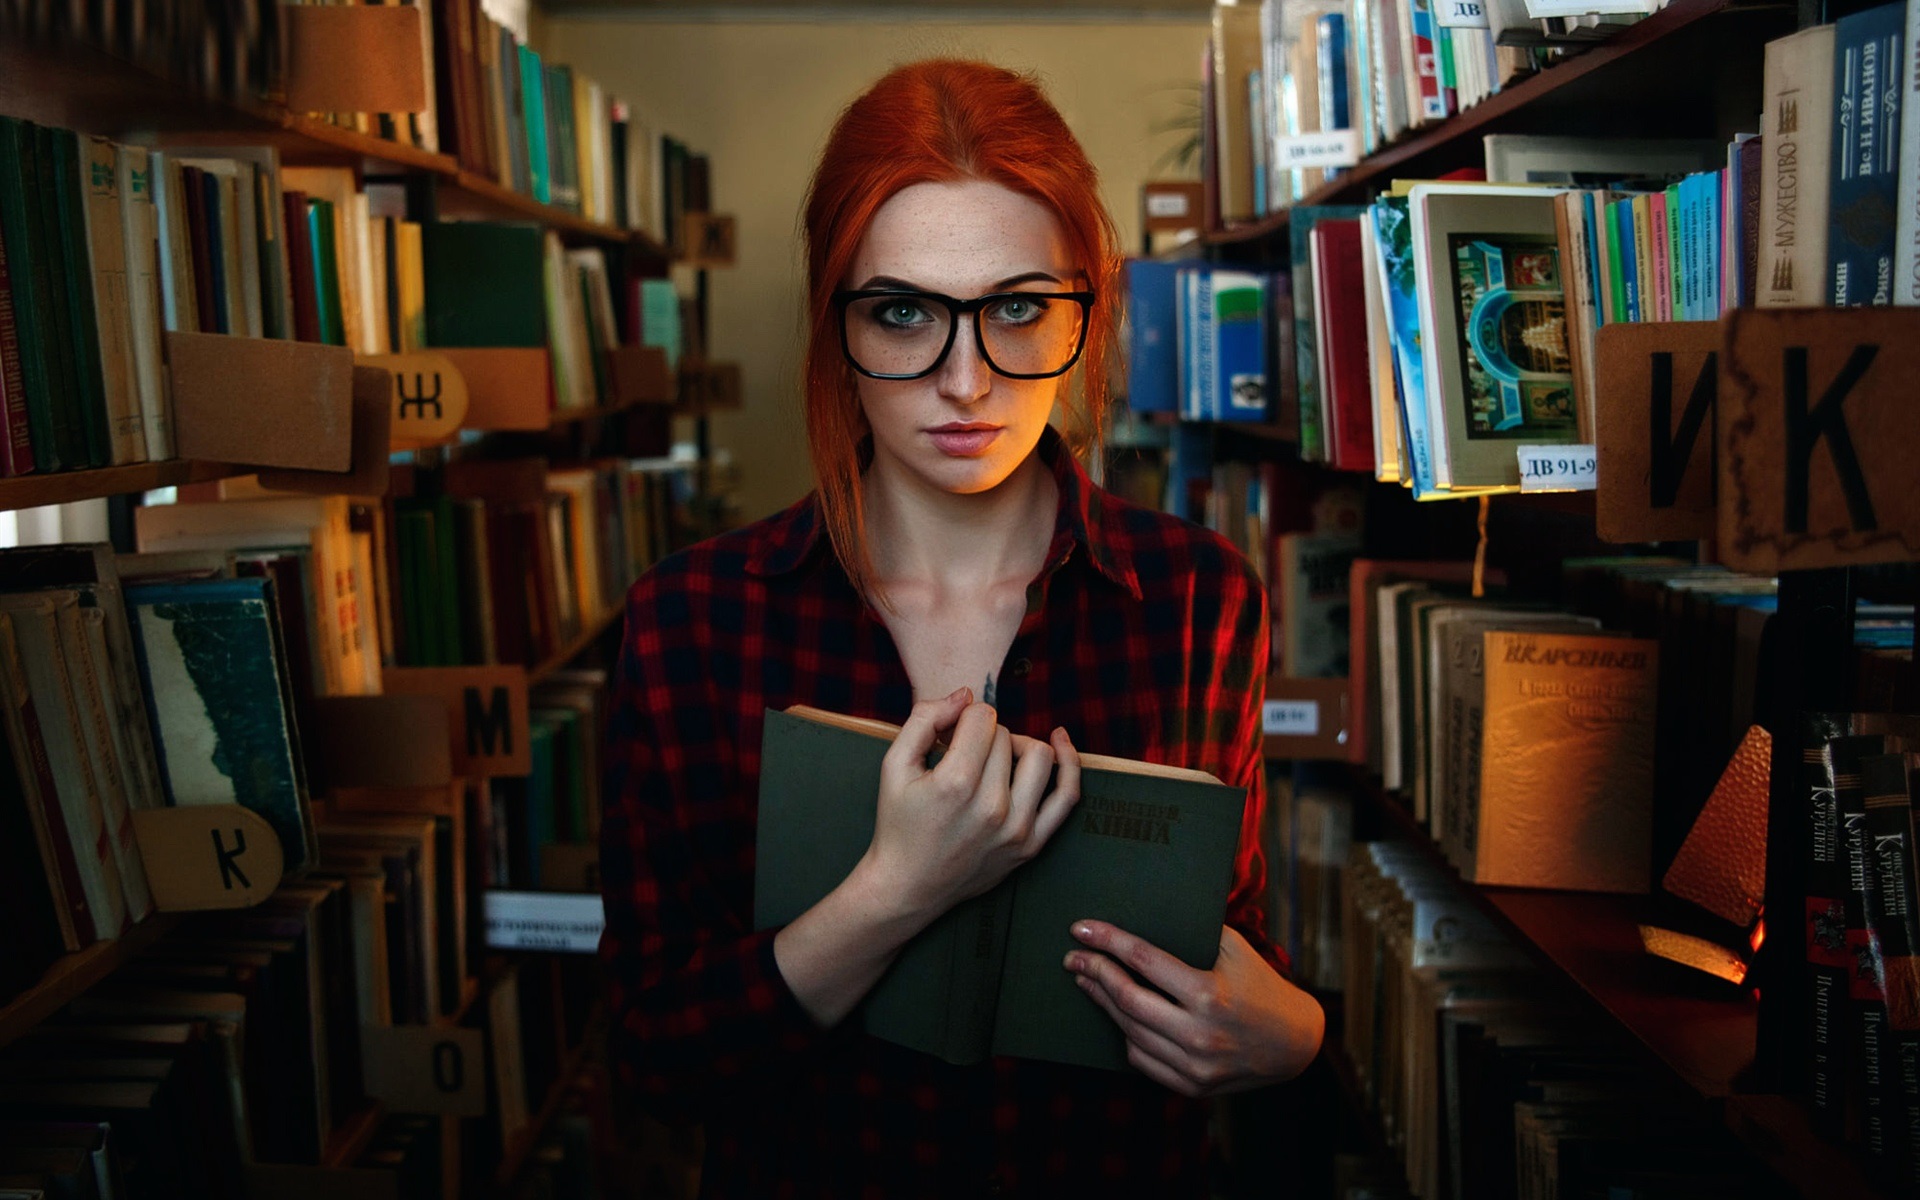 Red Hair Girl Freckles Glasses Library Reading Book